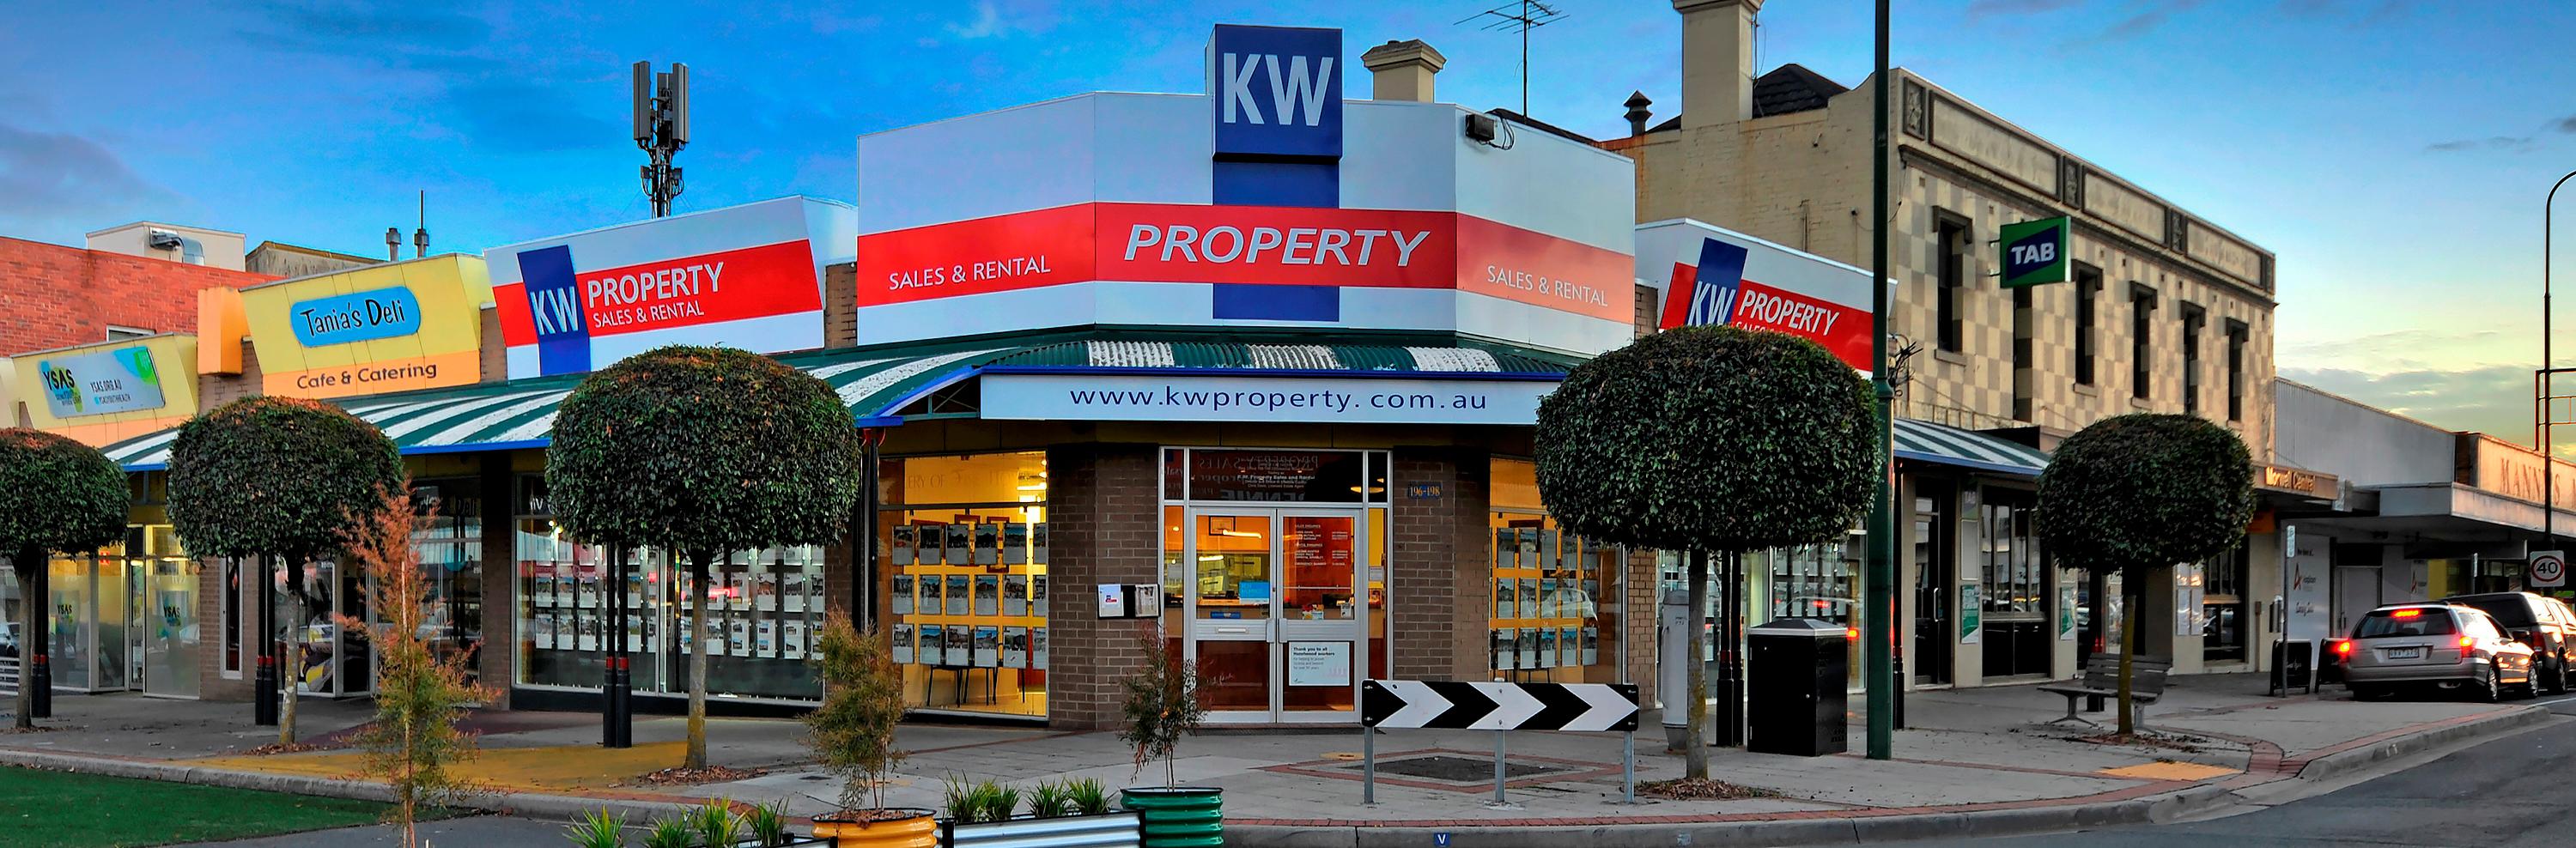 Images KW Property Sales and Rental